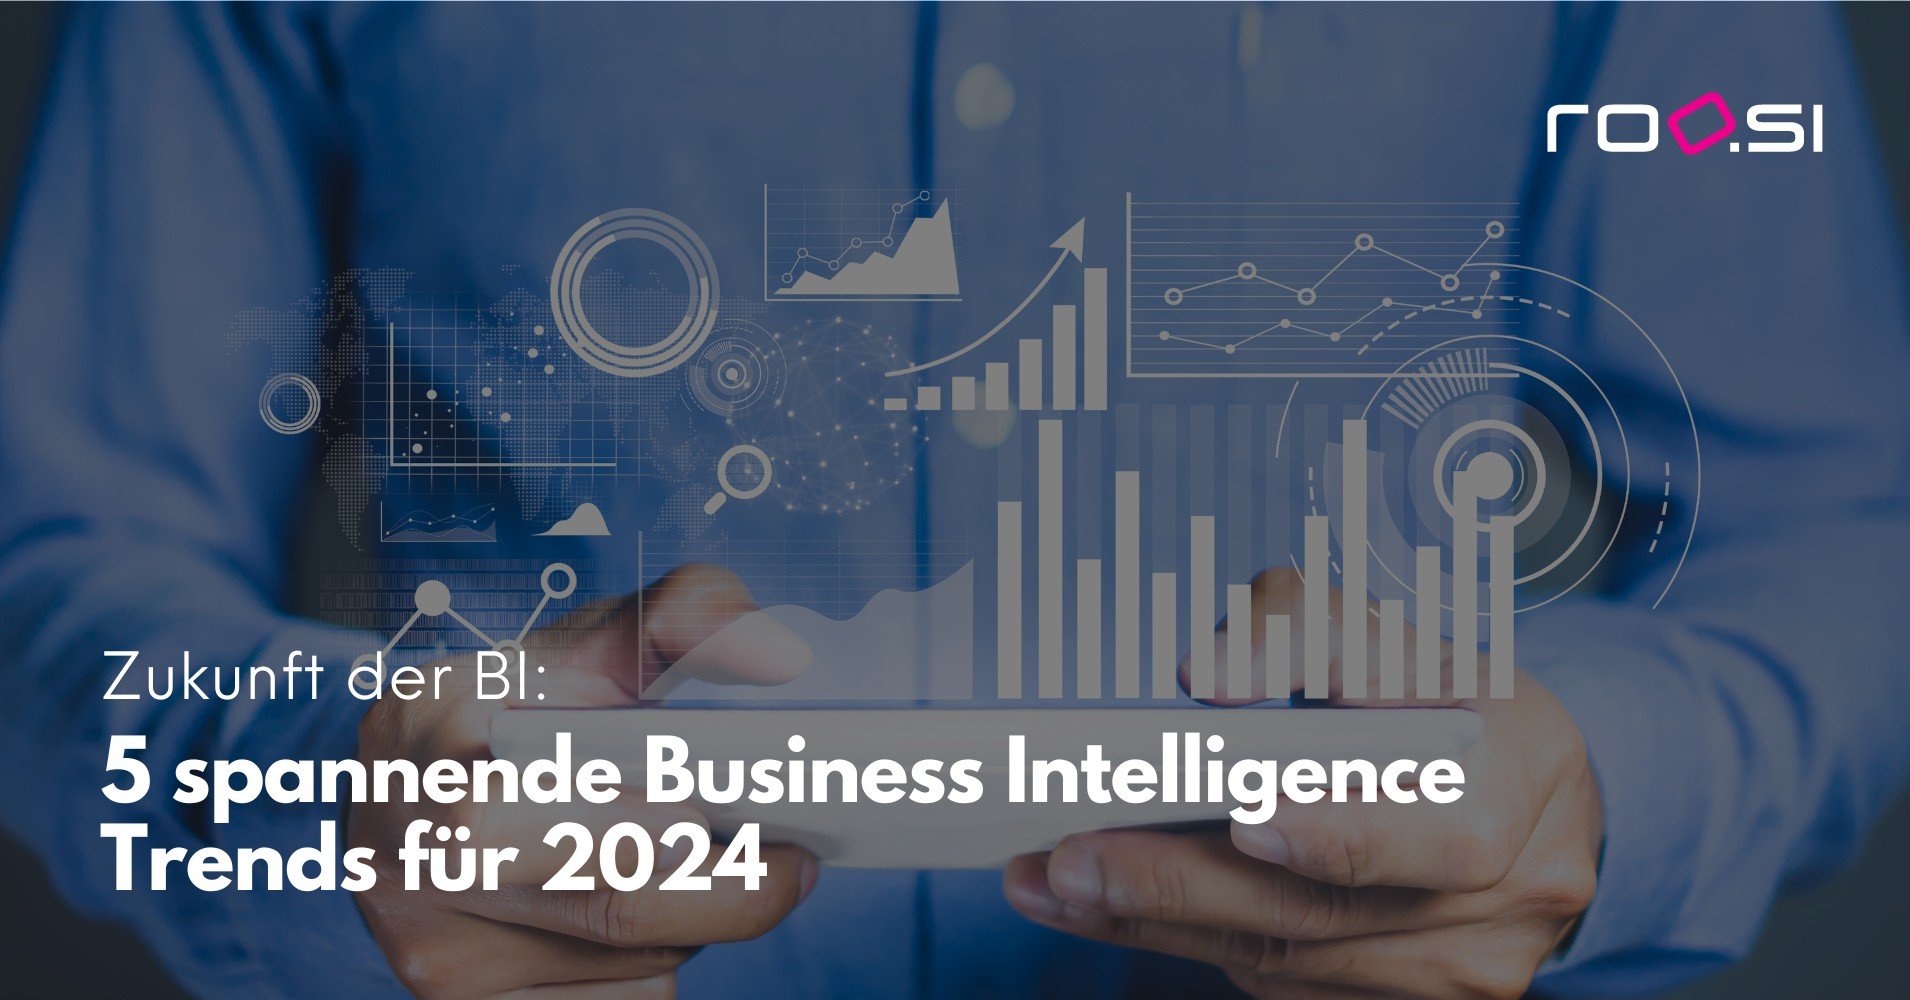 roosi_blog_5_spannende_business_intelligence_trends_fuer_2024